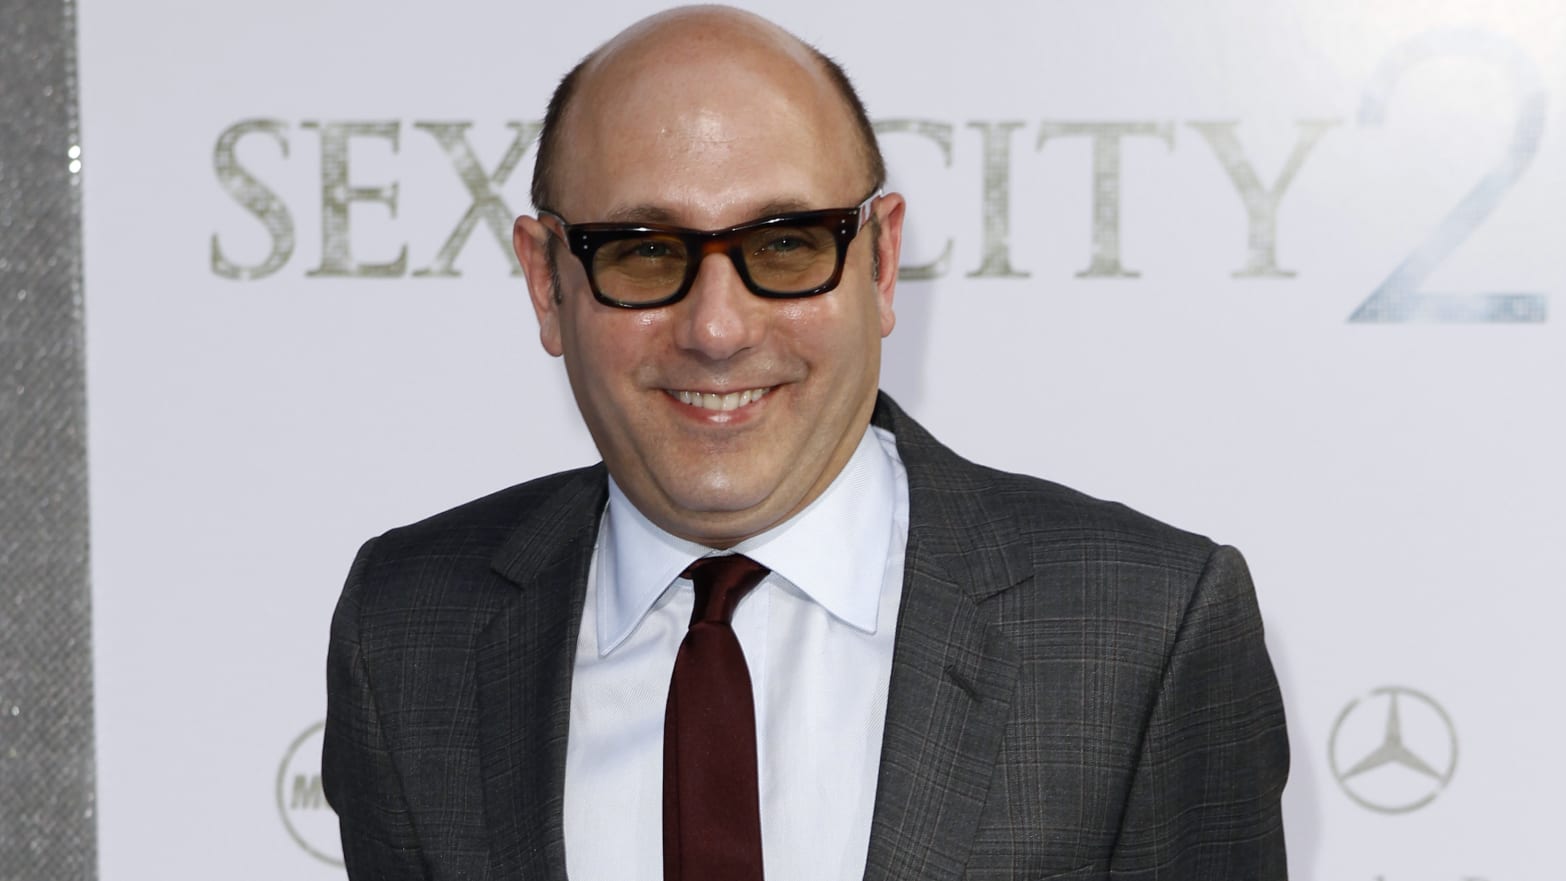 Willie Garson at the premiere of "Sex and the City 2"